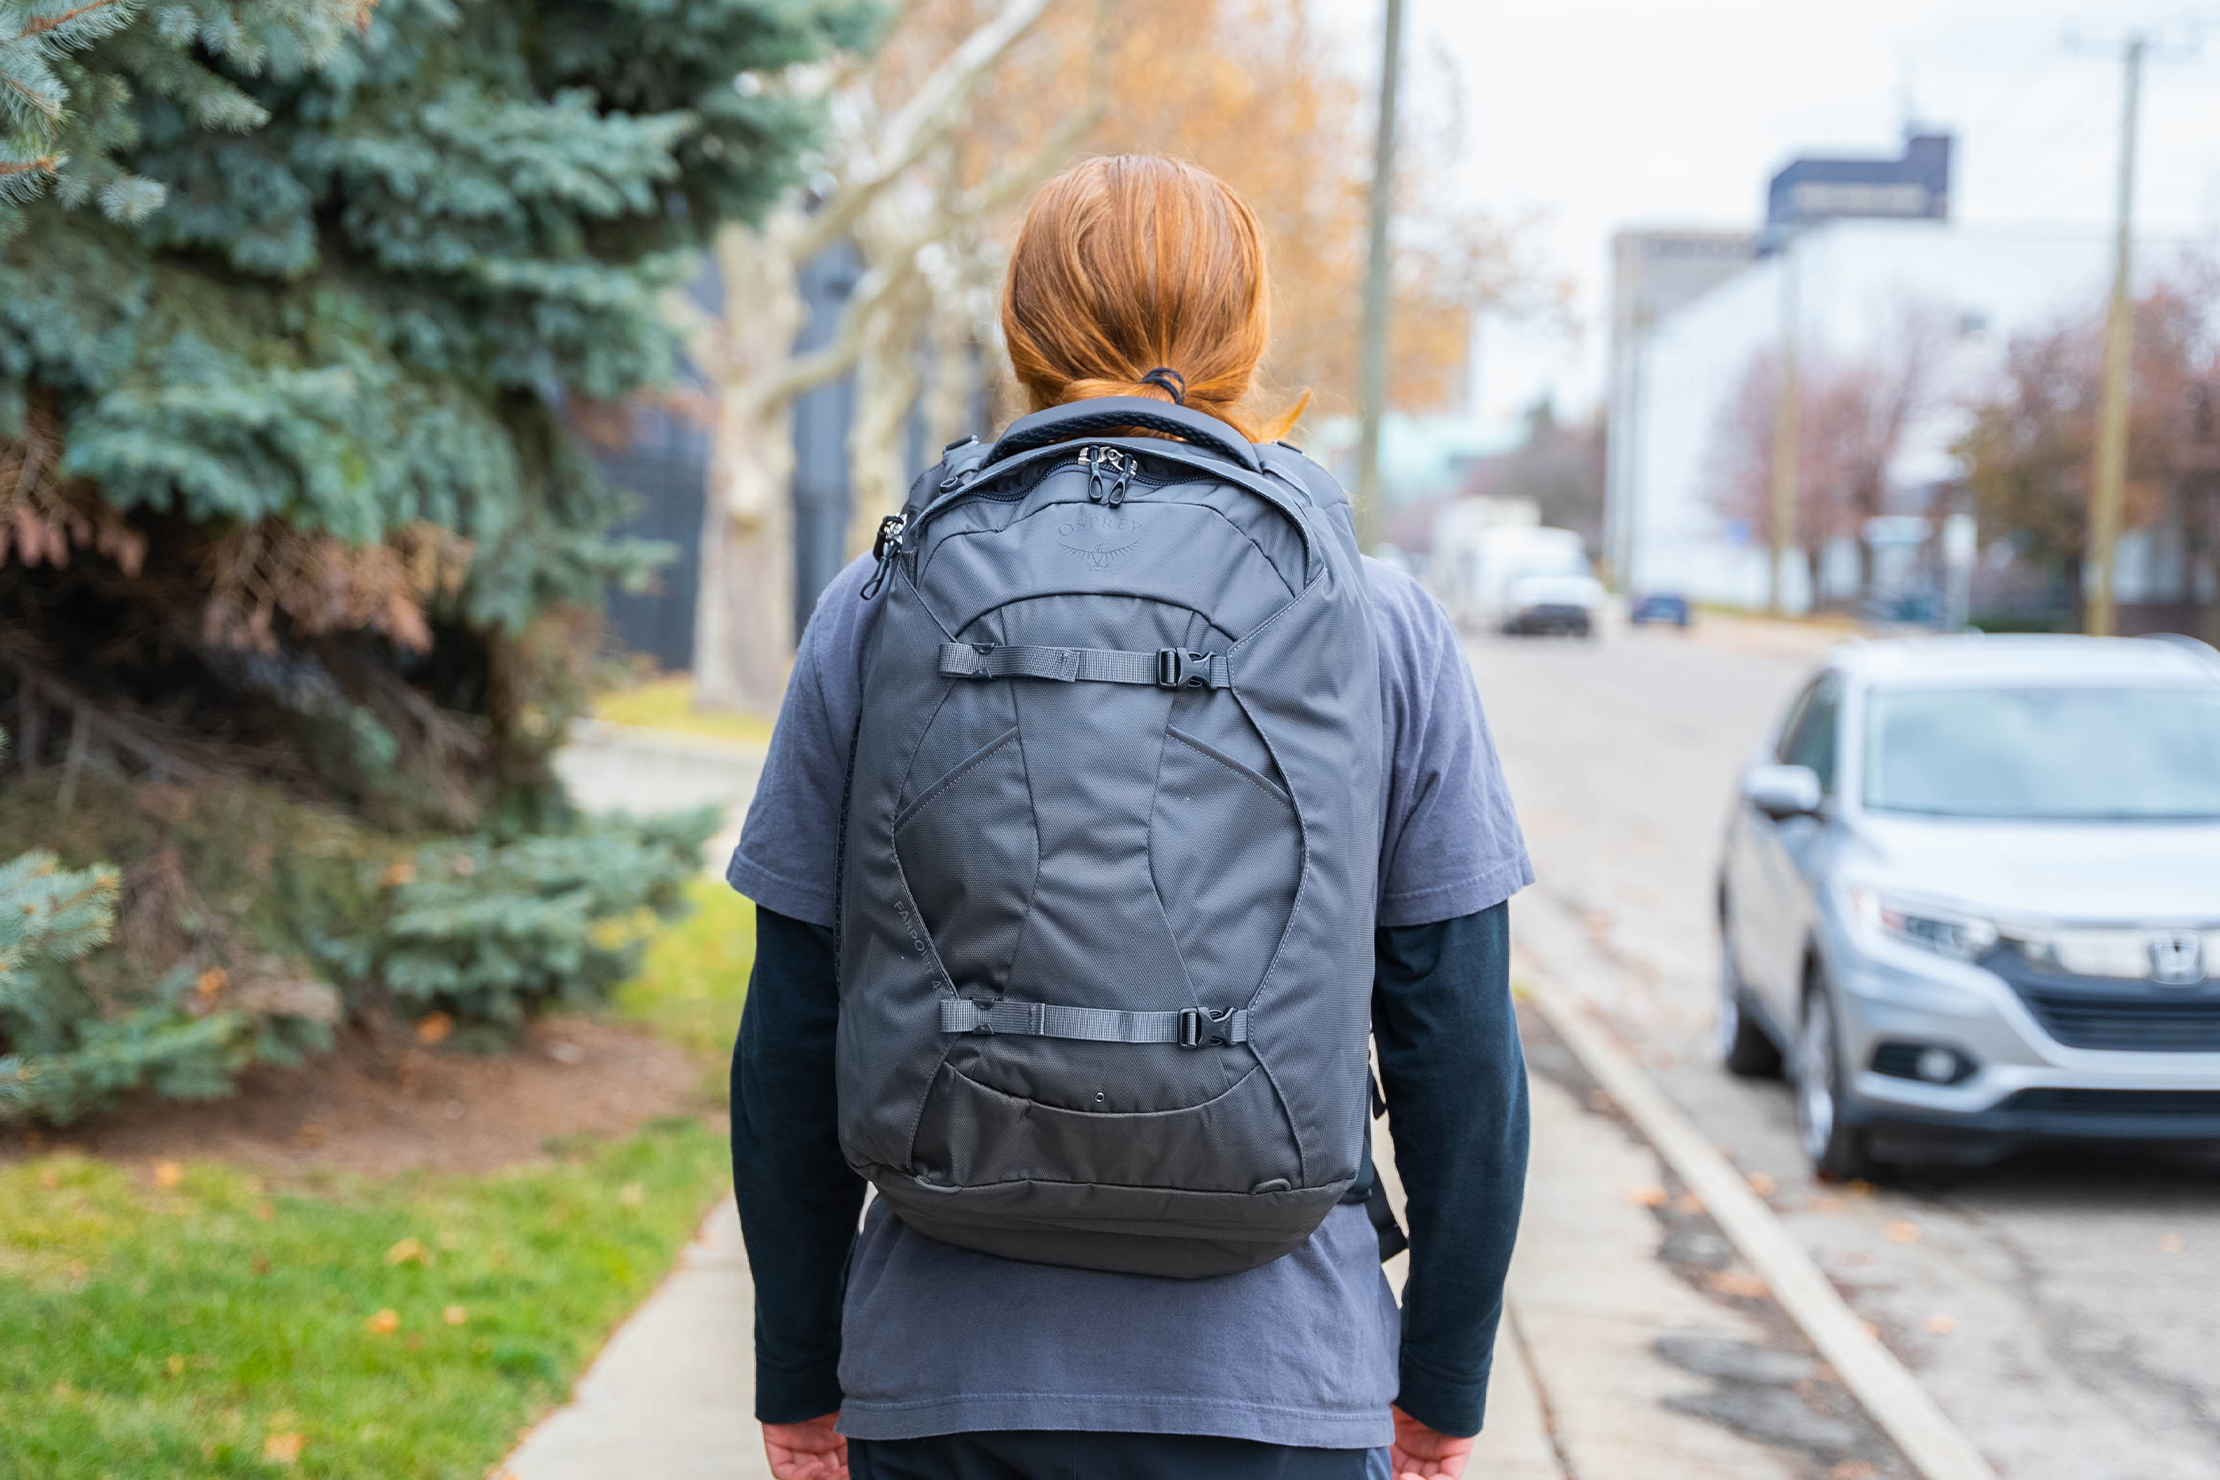 Osprey Farpoint 40 Backpack Review - 1 Year Test, Popular Travel Pack